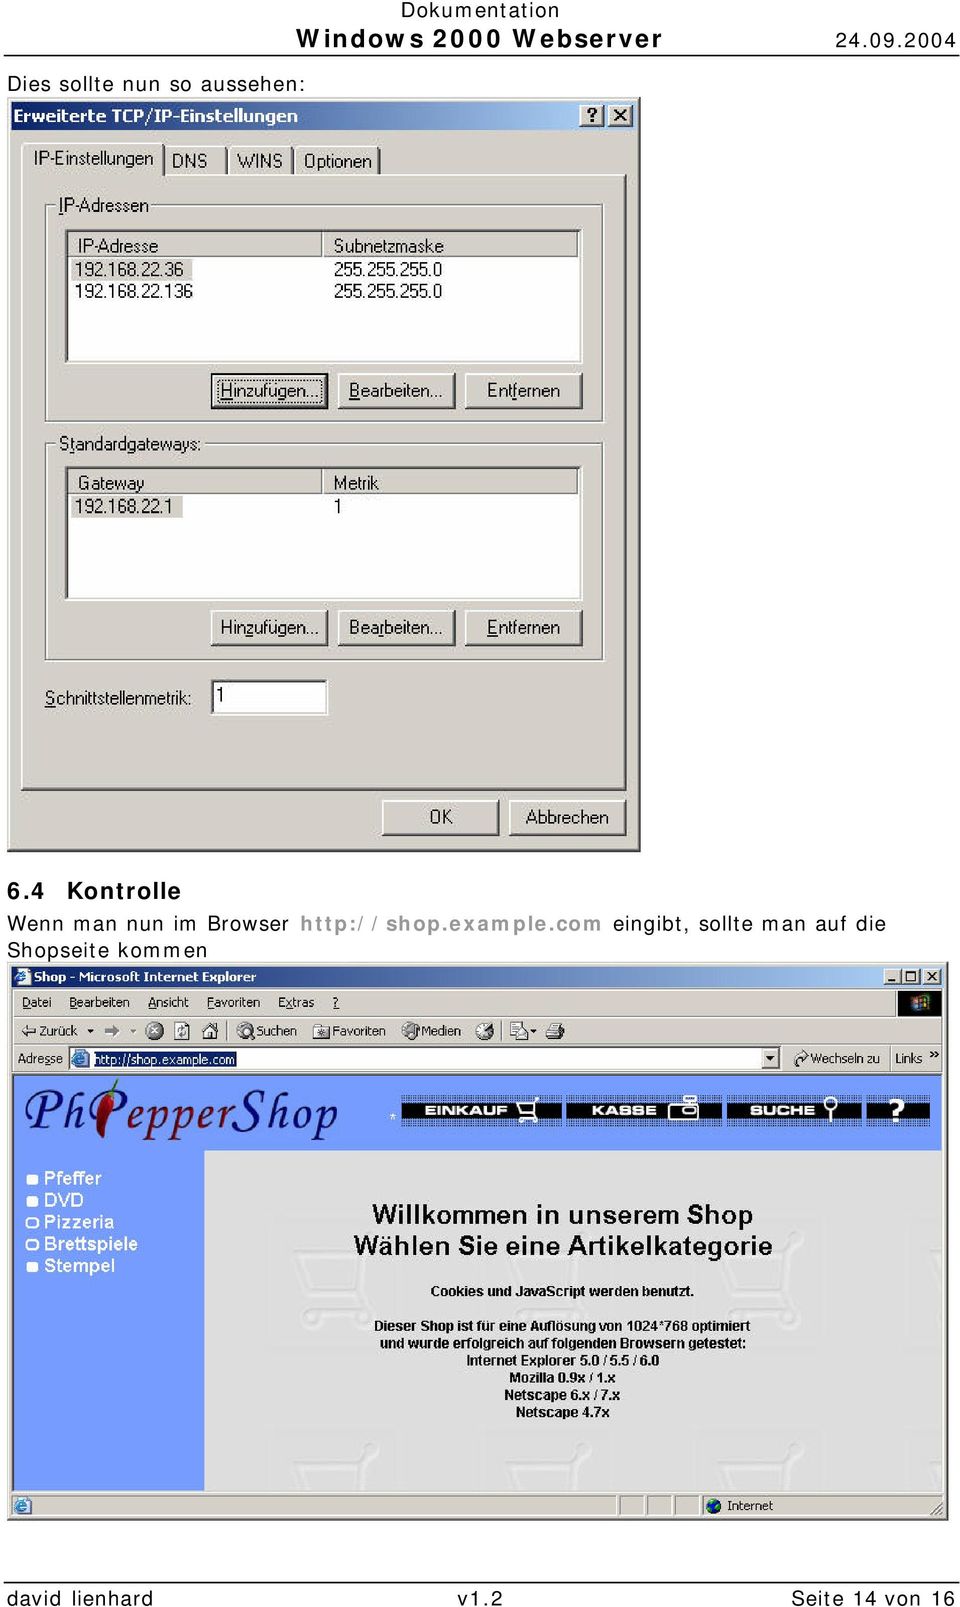 http://shop.example.